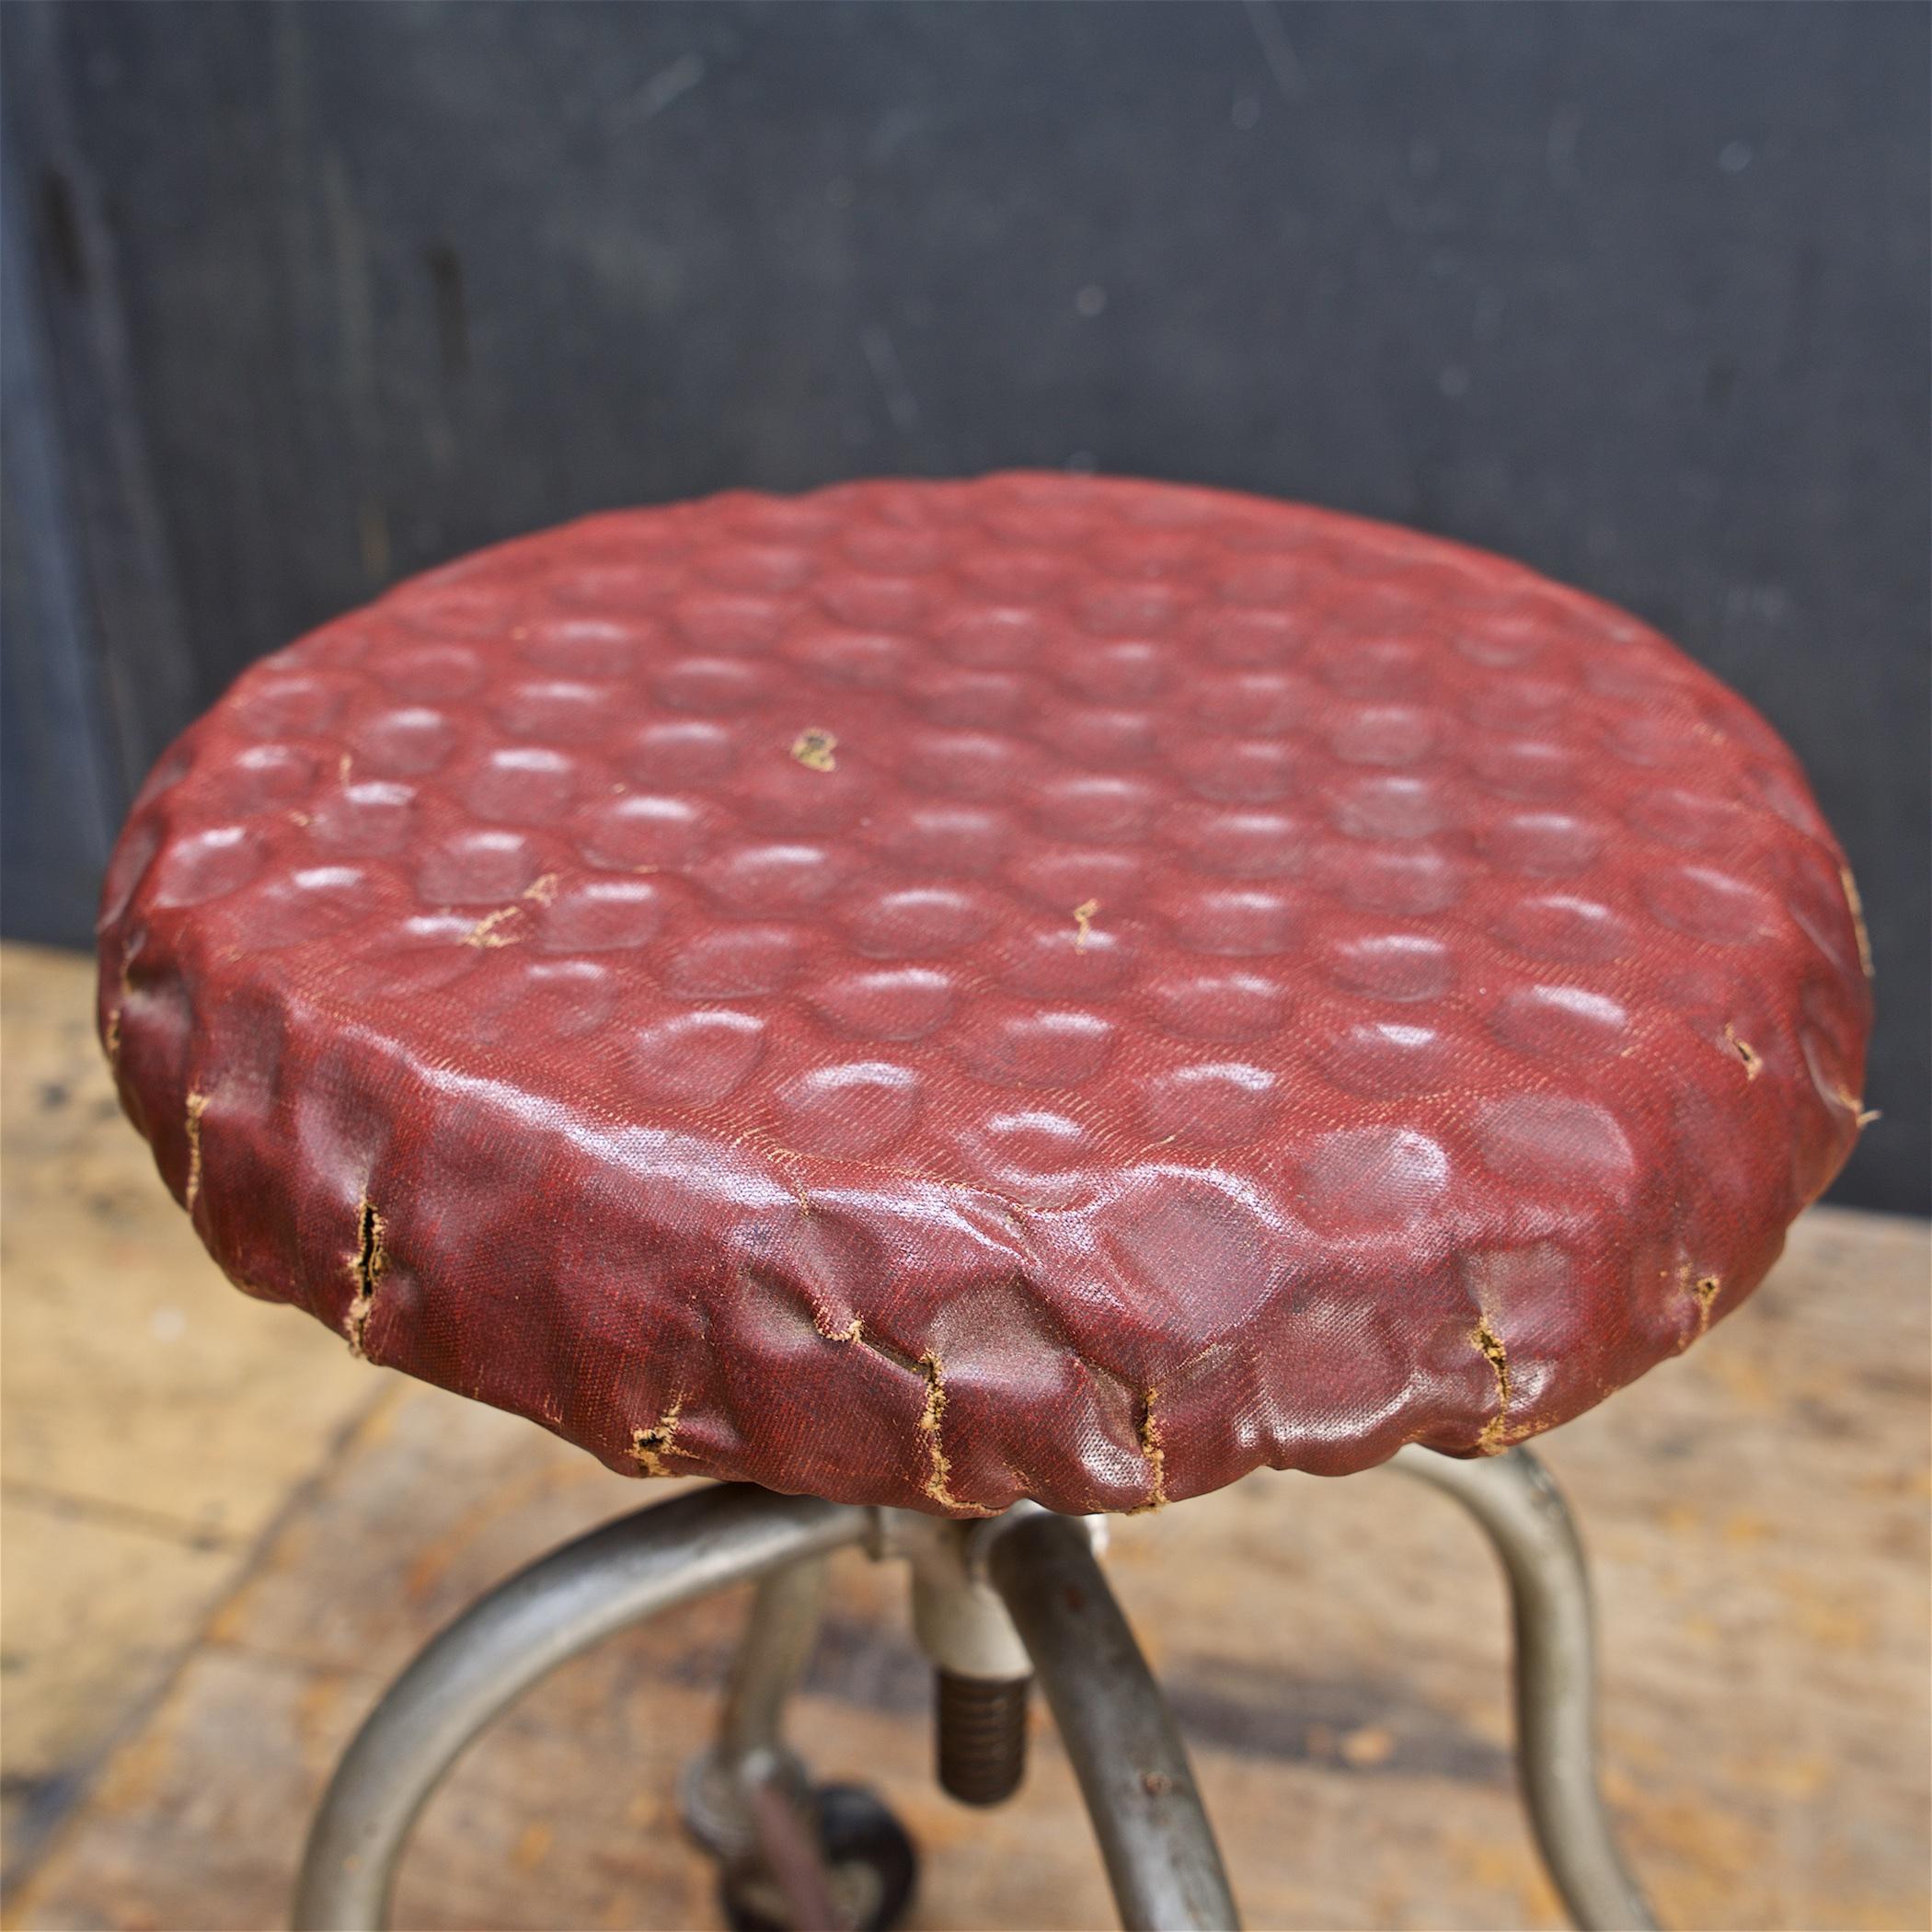 1930s Dimpled Industrial Artists Painters Sculptors Stool Vintage Iron Wheels In Distressed Condition For Sale In Hyattsville, MD